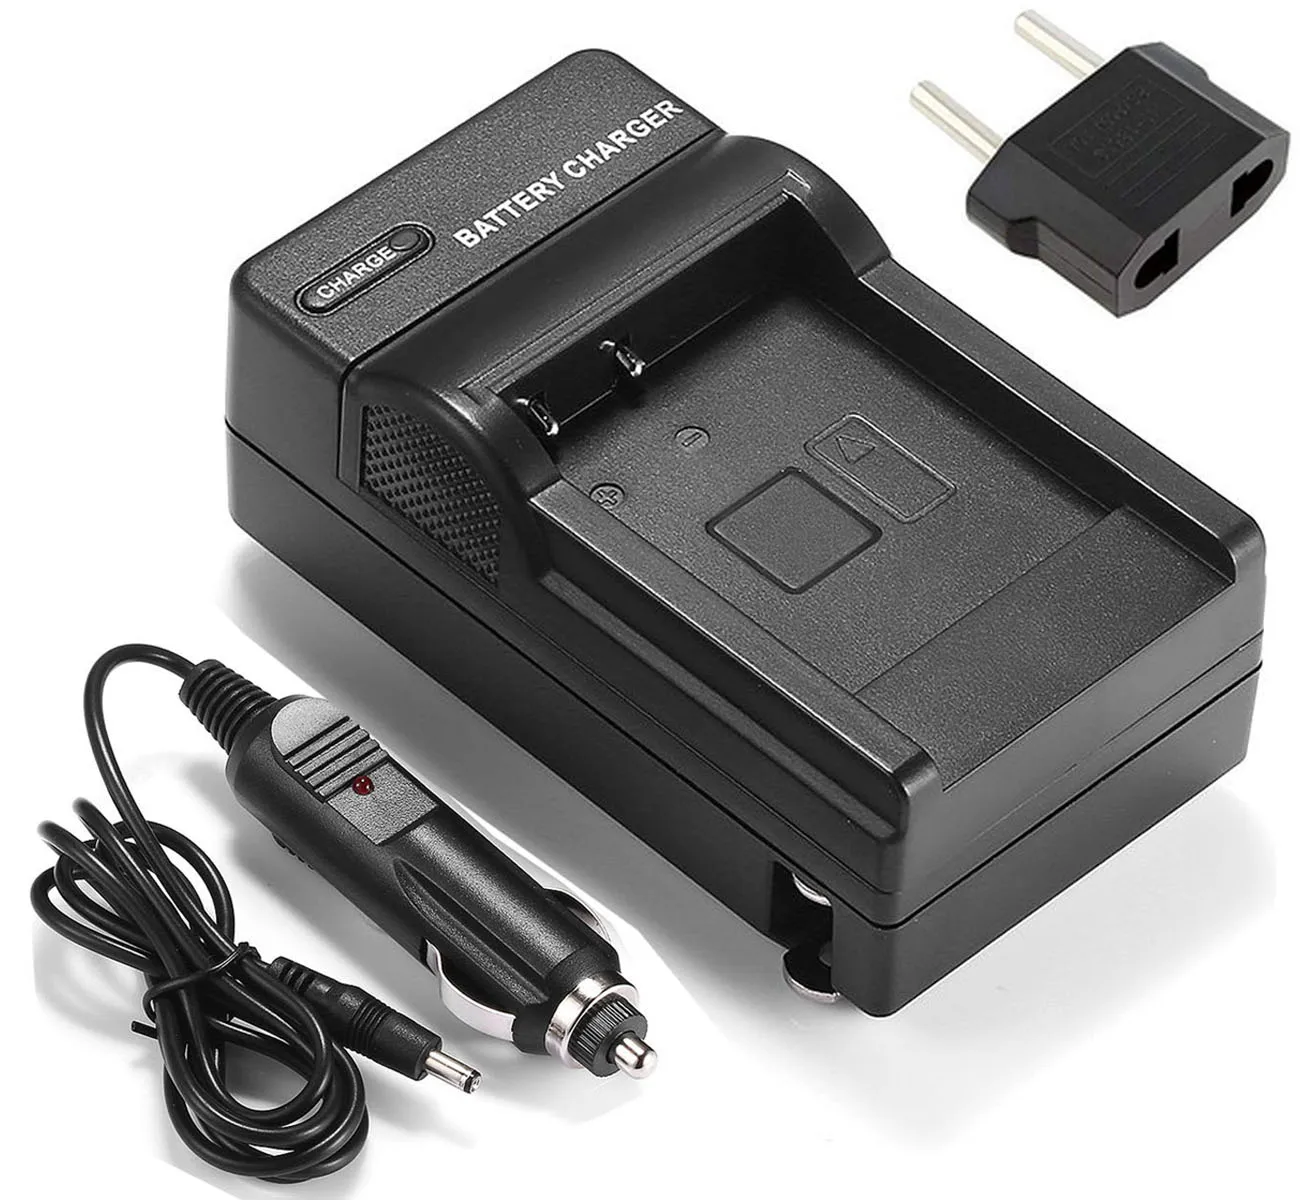 Battery Charger for Canon PowerShot SX170 IS, SX240, SX260, SX270, SX280 HS, SX500 IS, SX510,SX520,SX530,SX540 HS Digital Camera